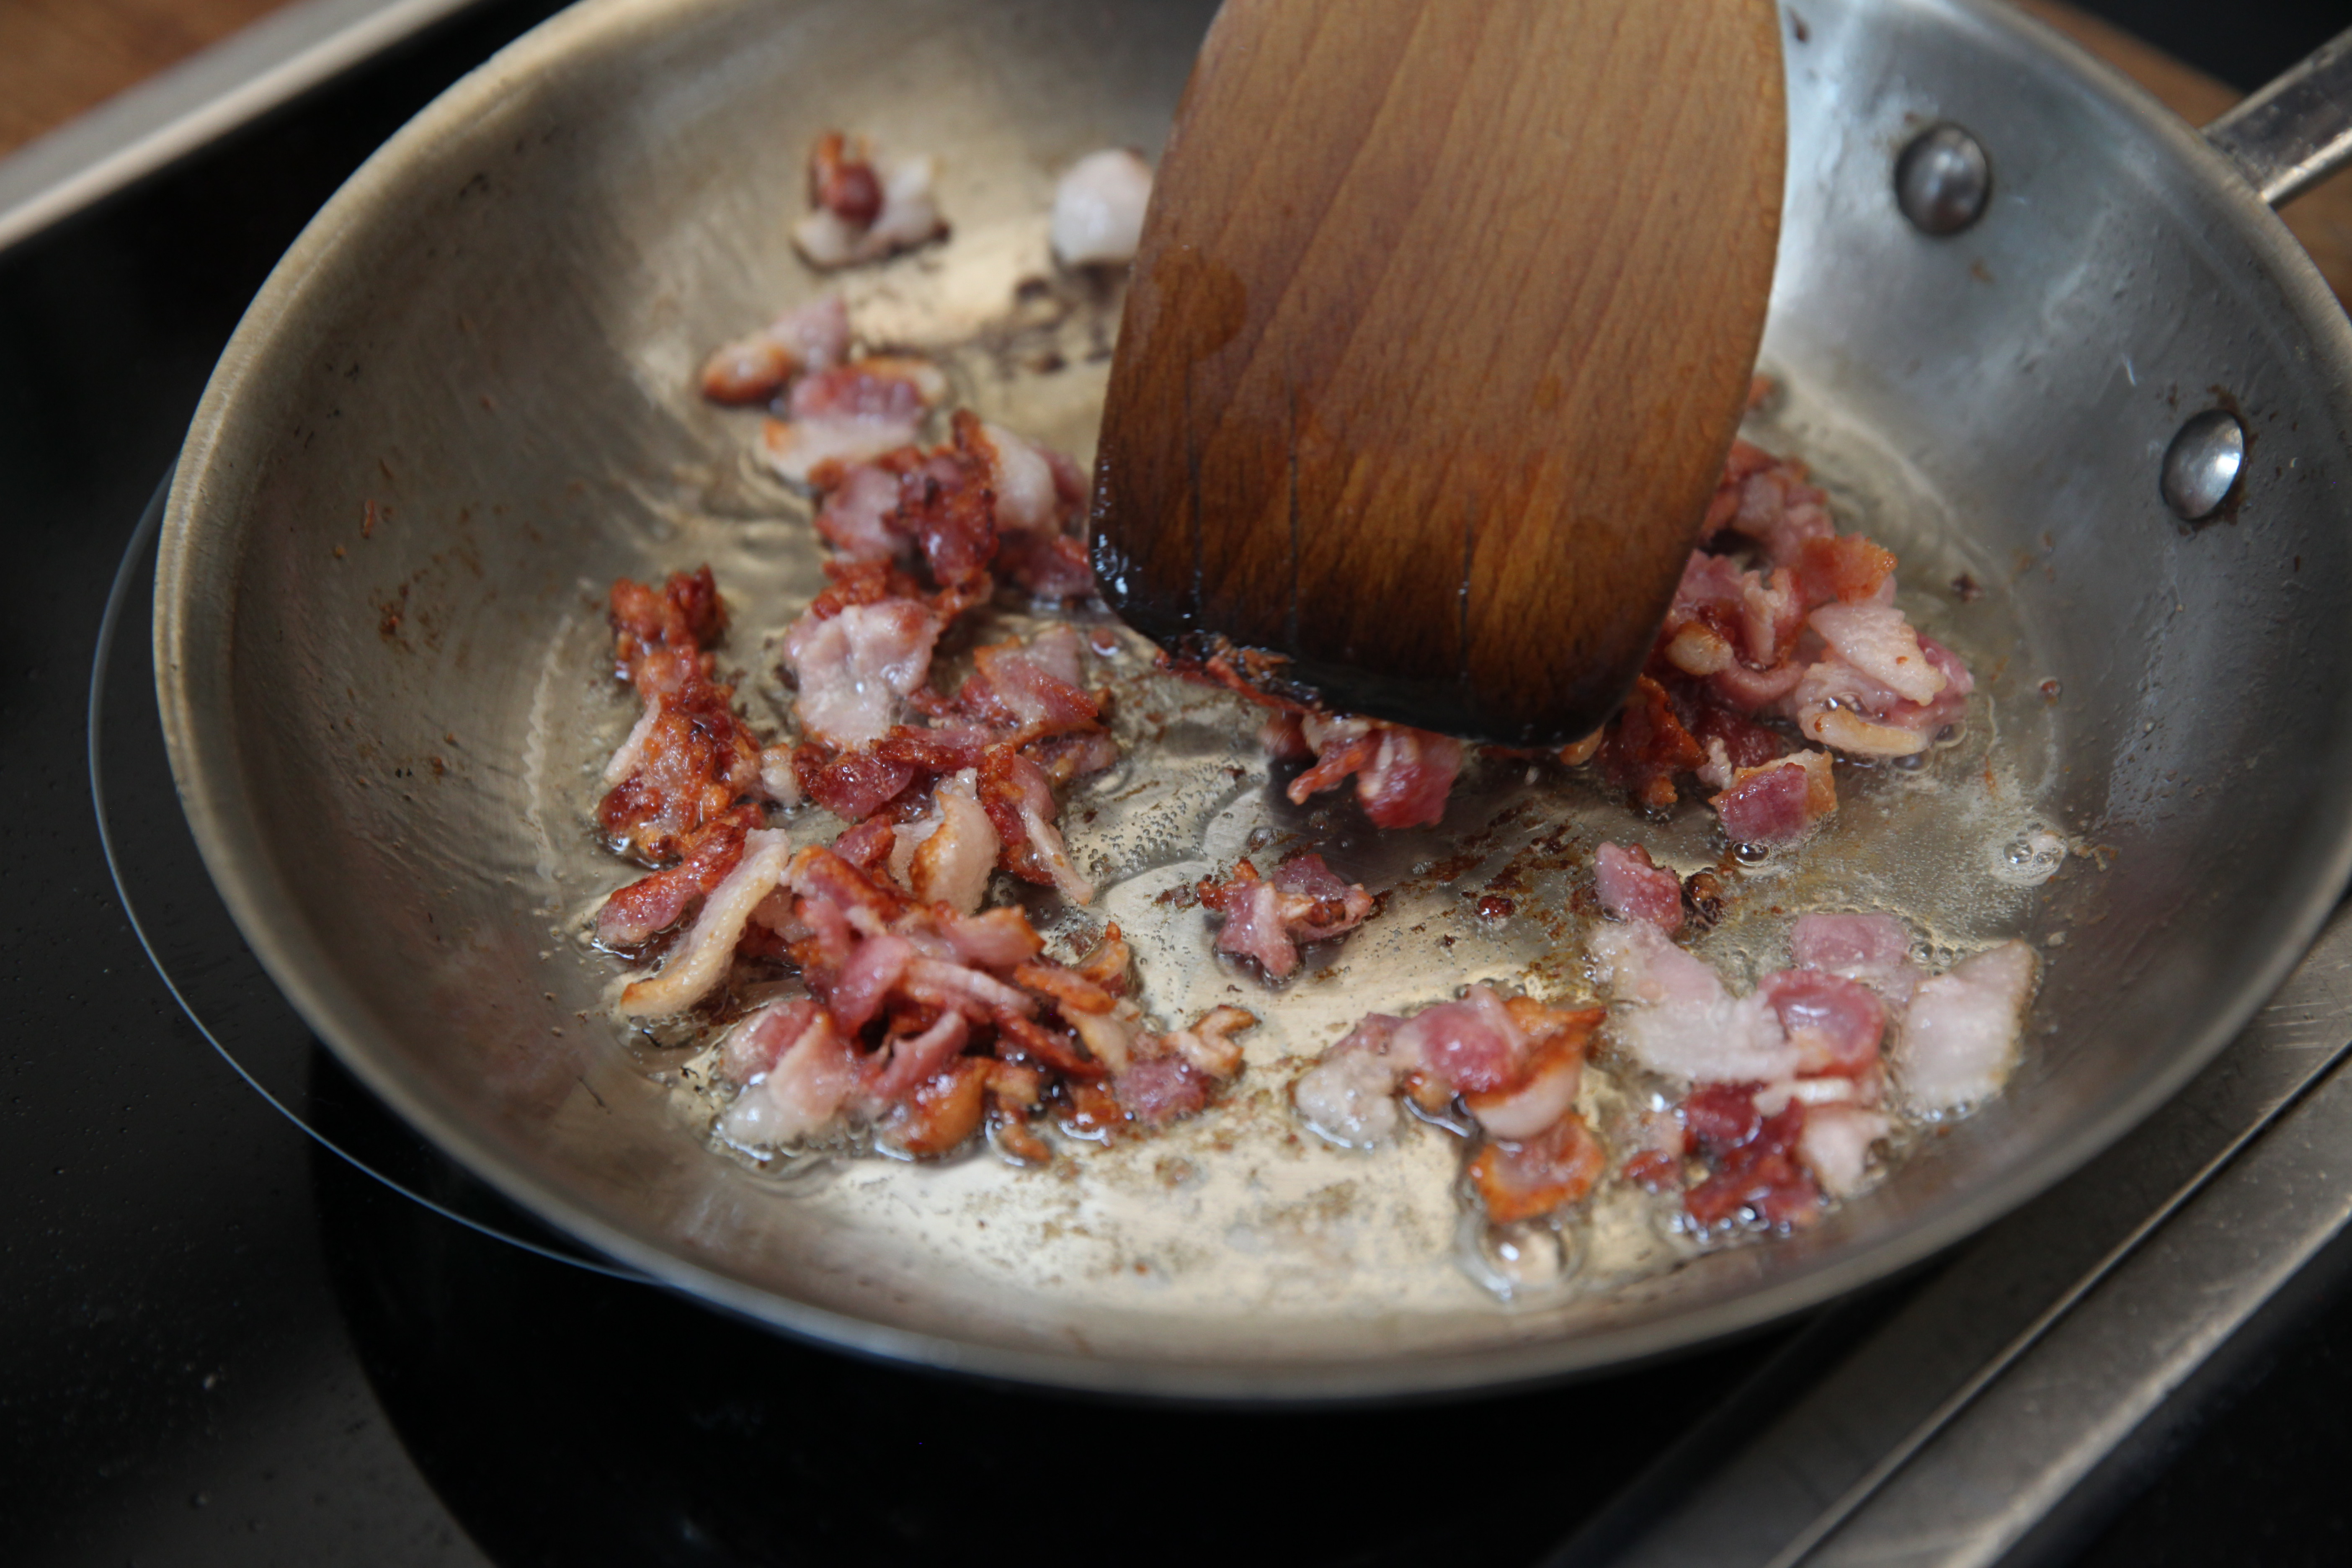 bacon bits cooking in a stainless steel pan in the munchies test kitchen